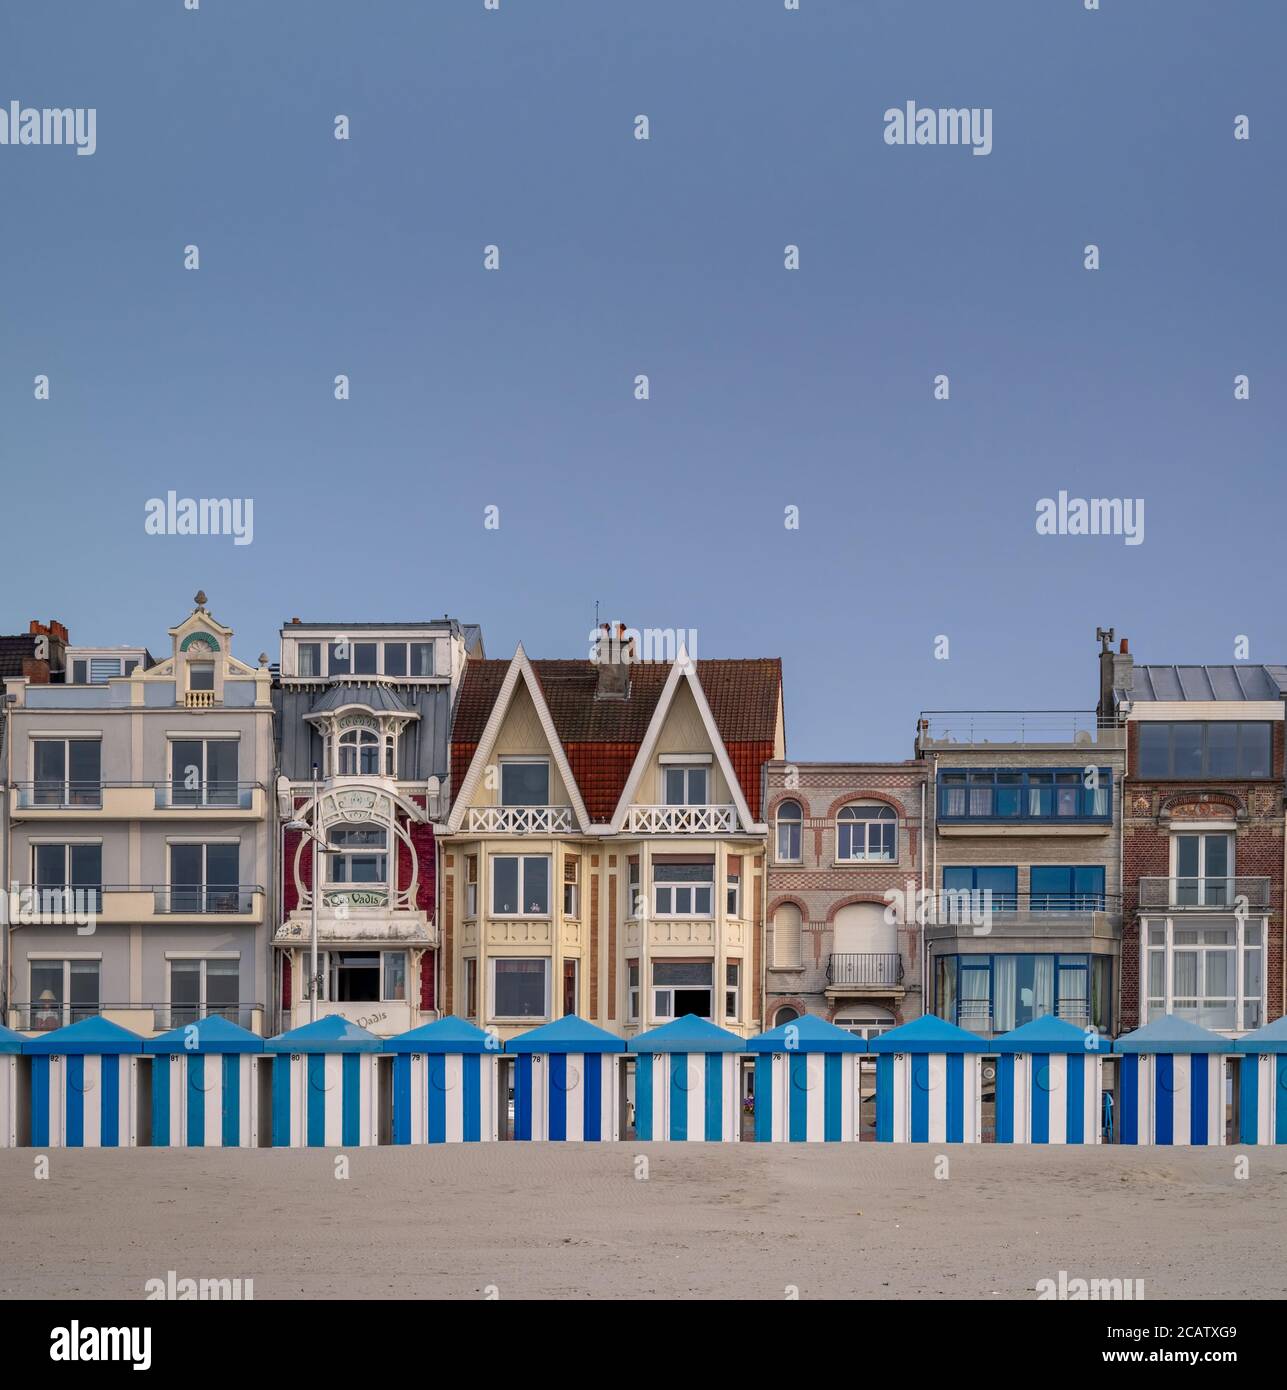 Blue and white striped beach huts against evening sky Stock Photo